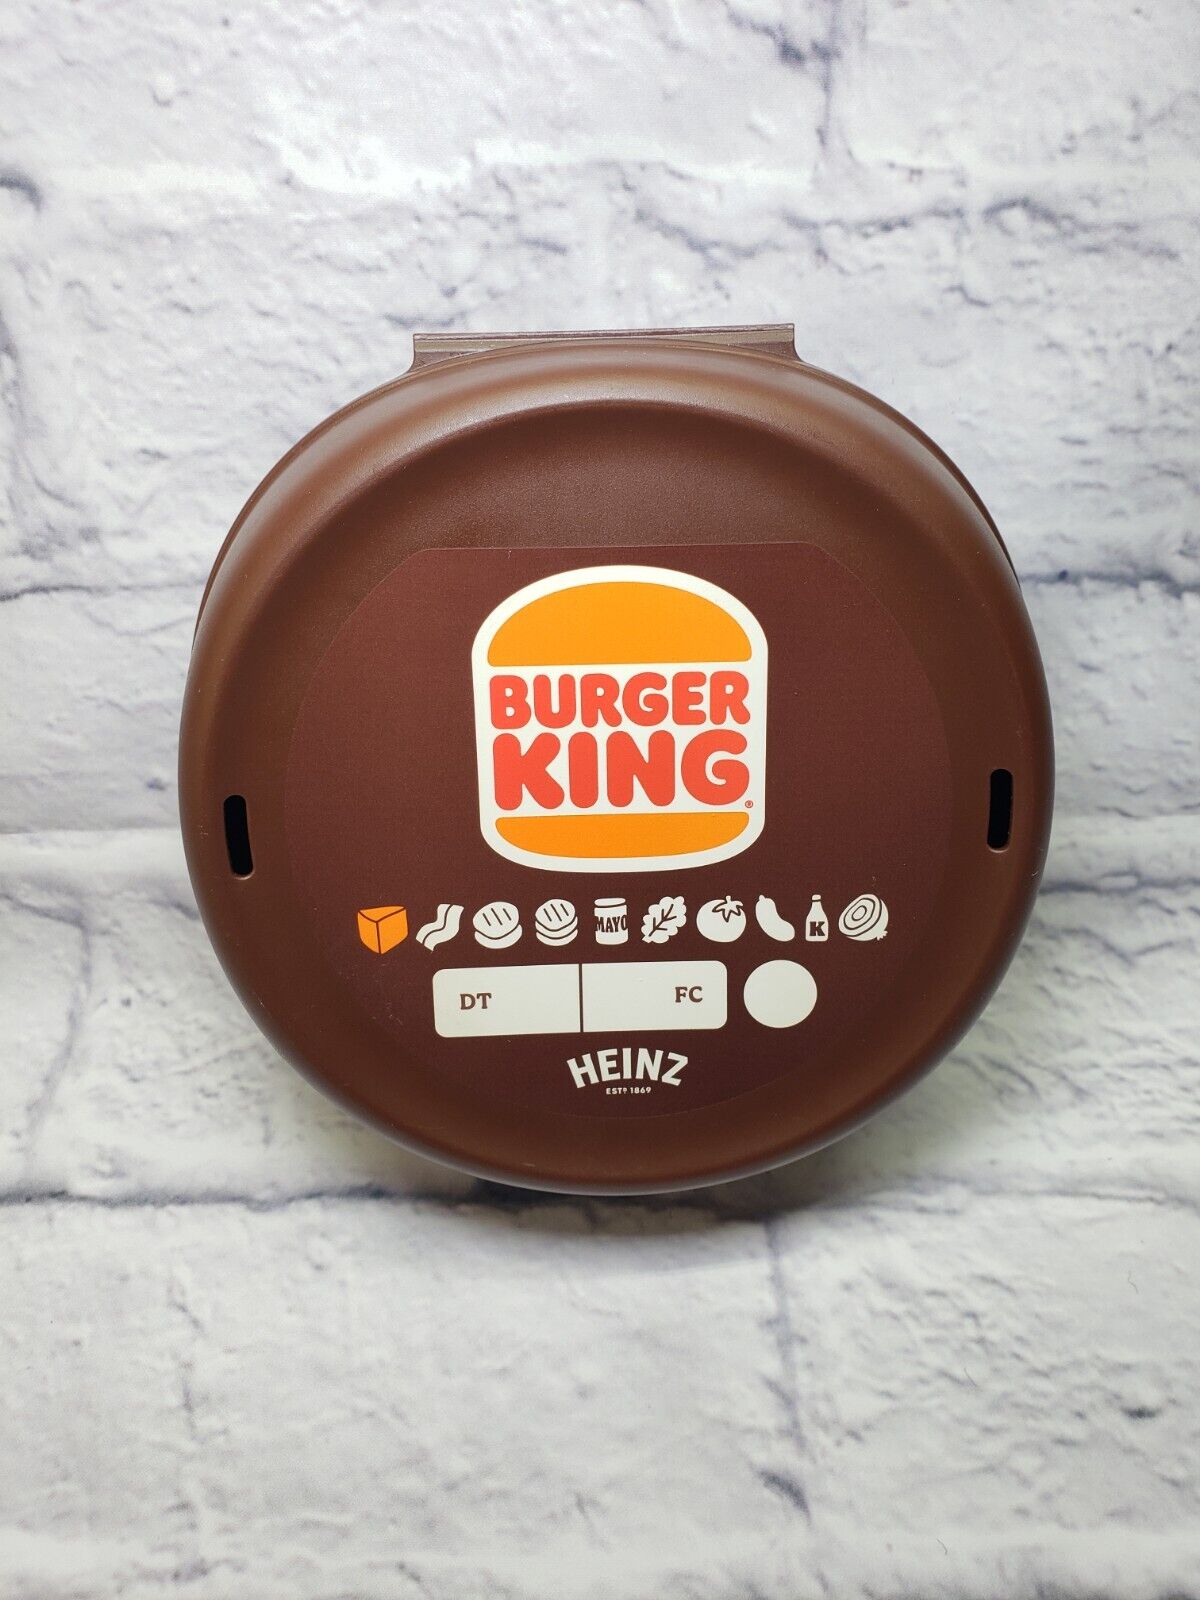 Burger King Whopper Official Tupperware Clamshell Fast Food Container 